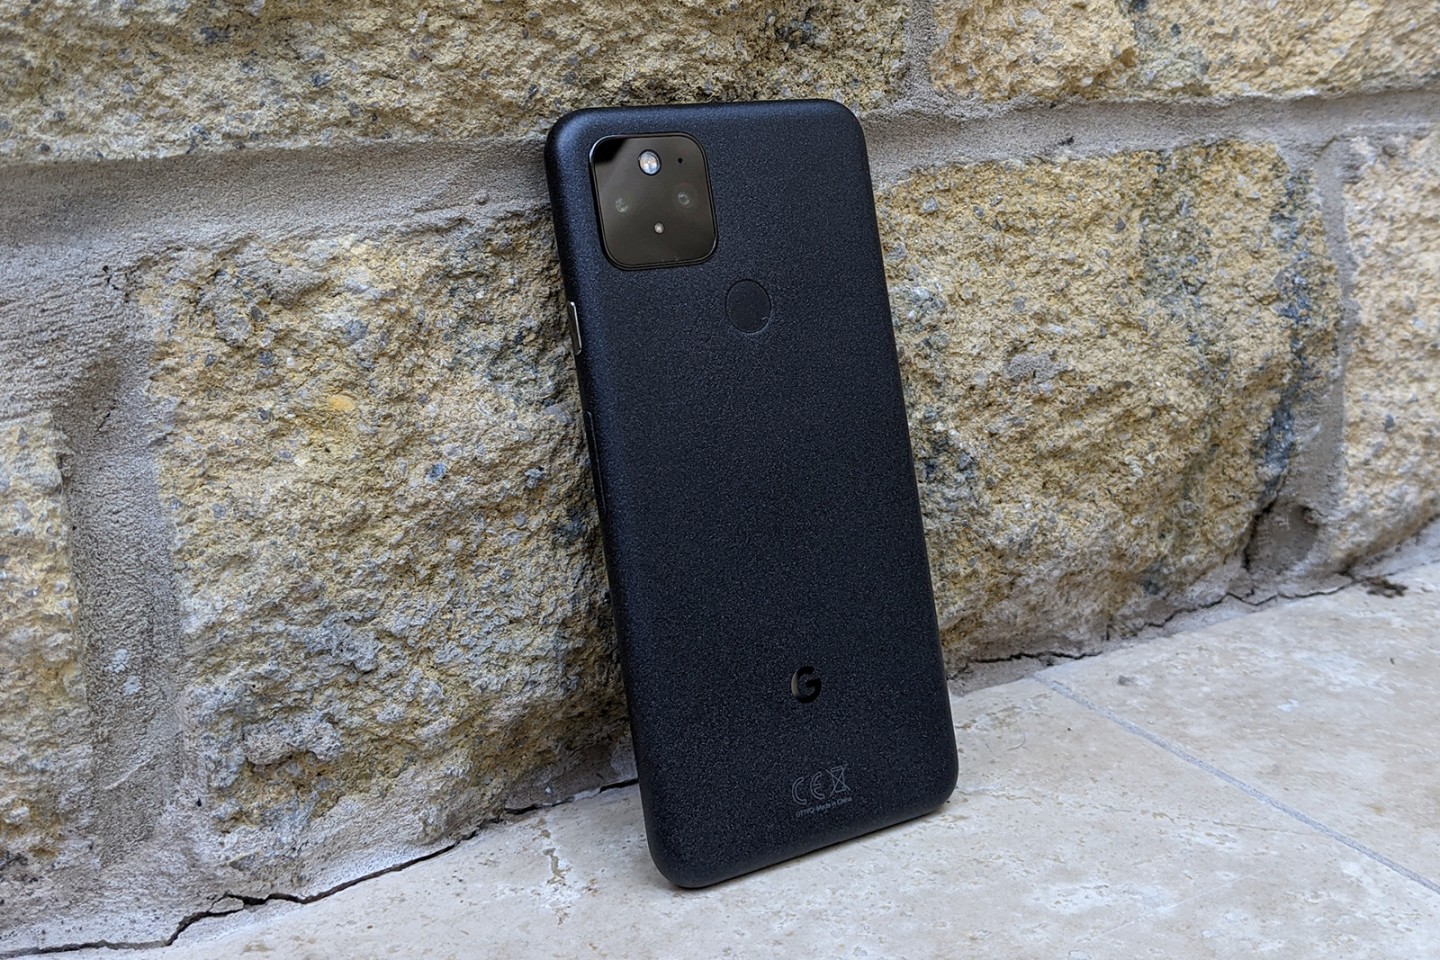 The Pixel 5 uses better quality materials than the Pixel 4a and Pixel 4a 5G